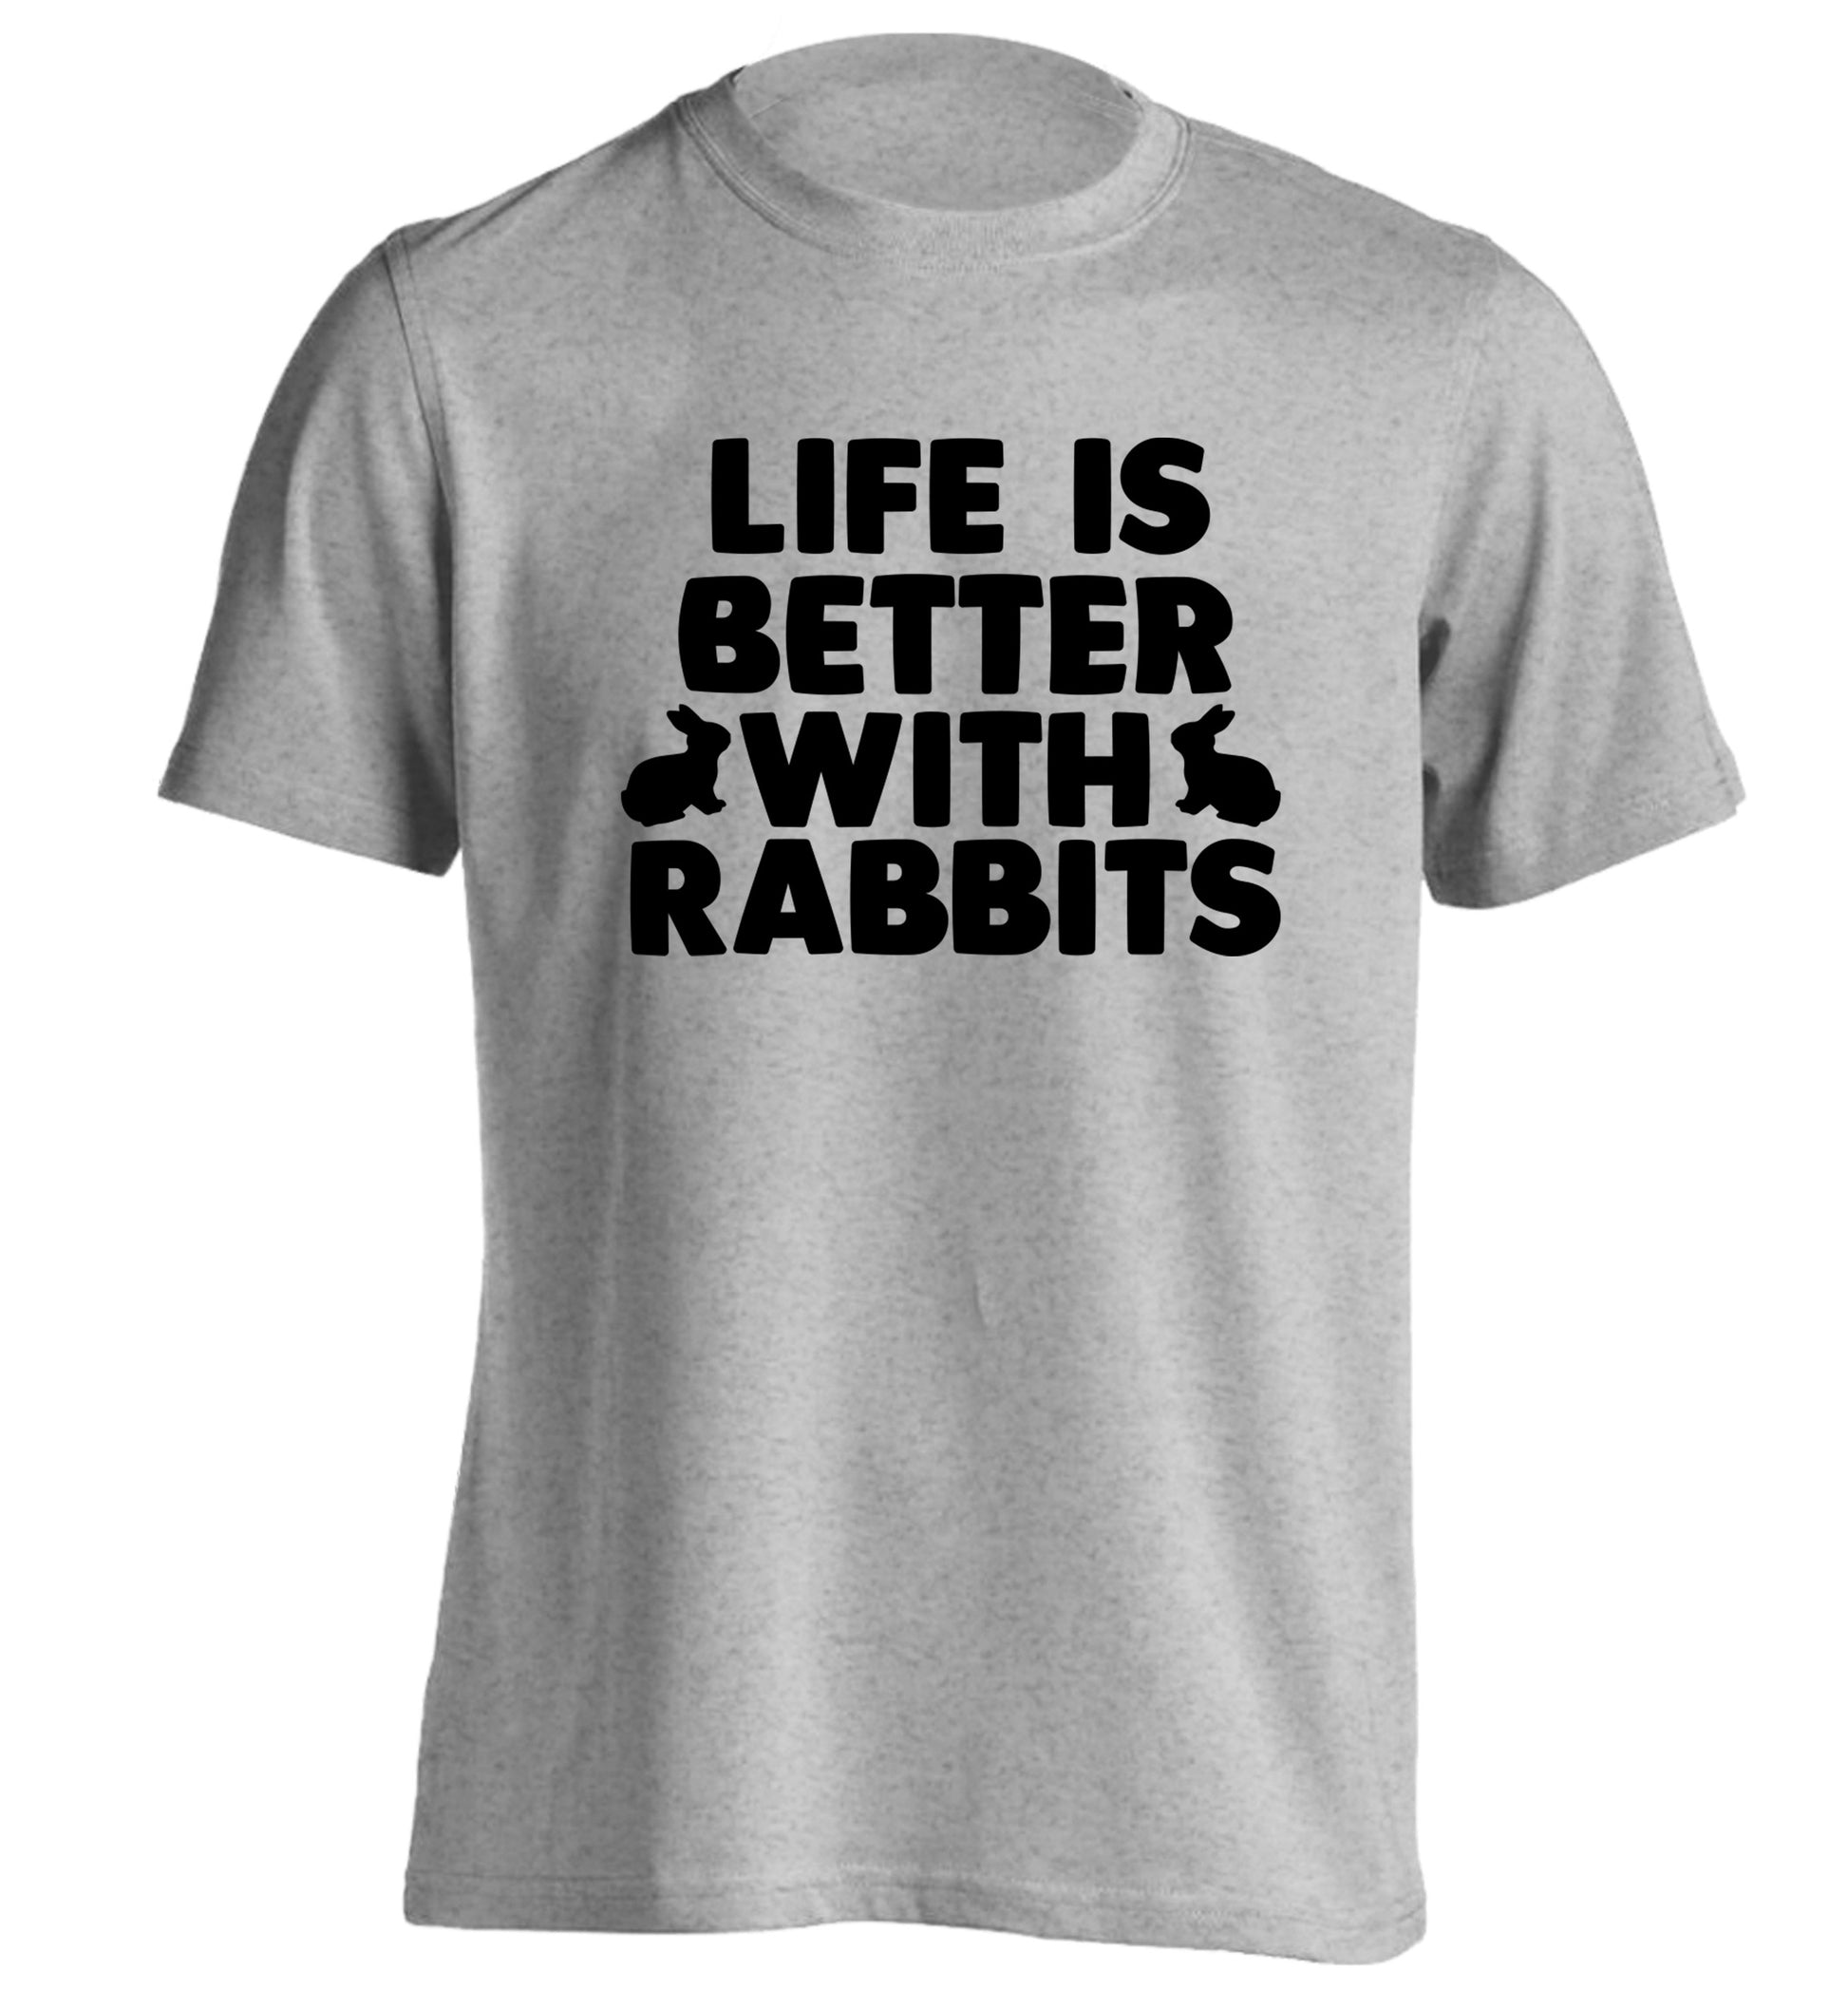 Life is better with rabbits adults unisex grey Tshirt 2XL